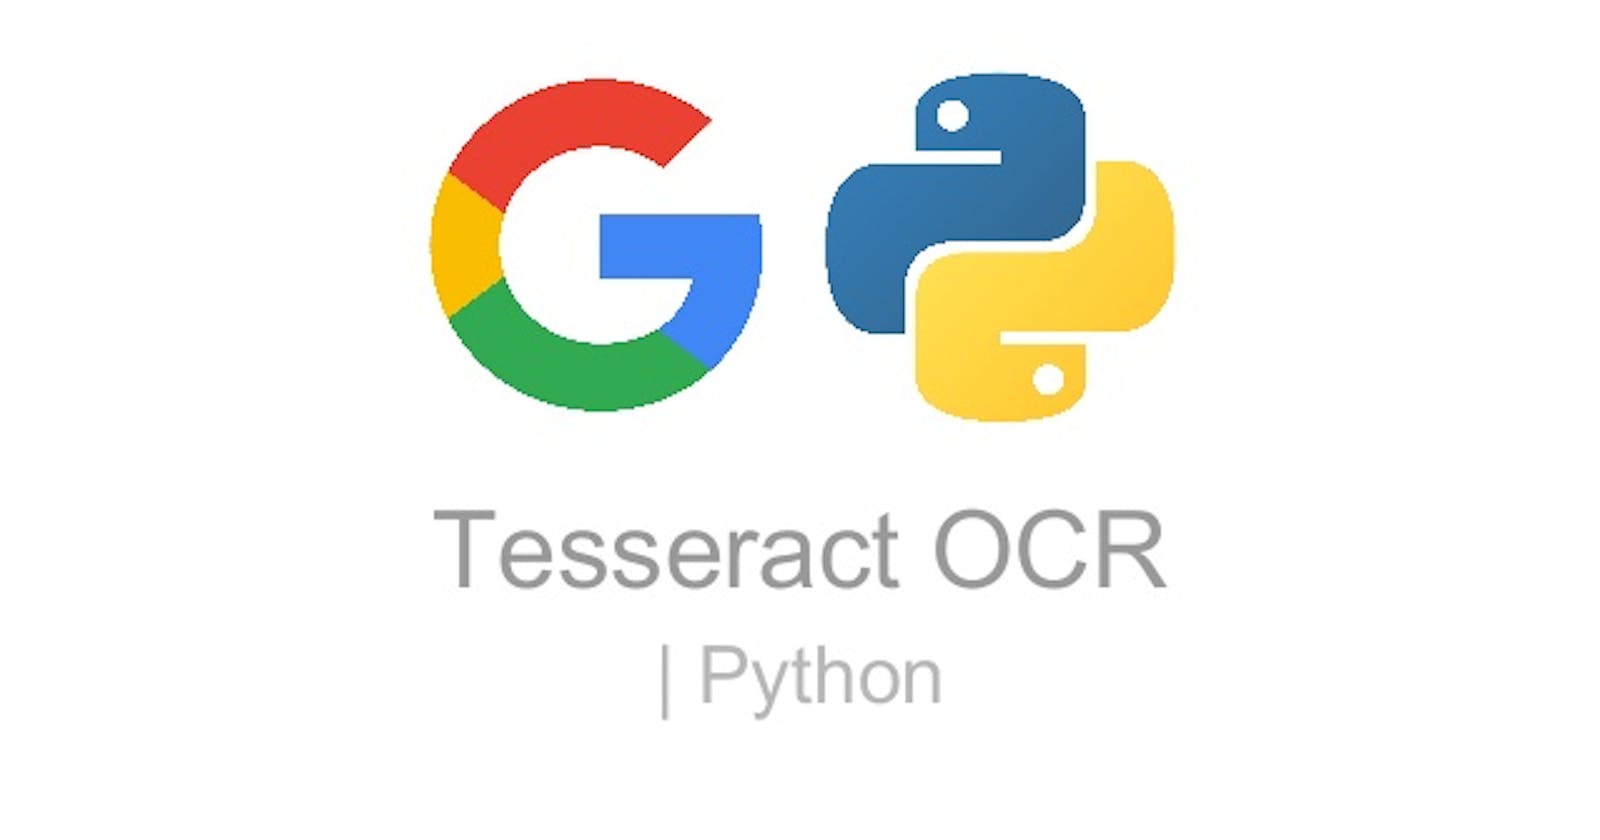 How to Install Tesseract-OCR on macOS